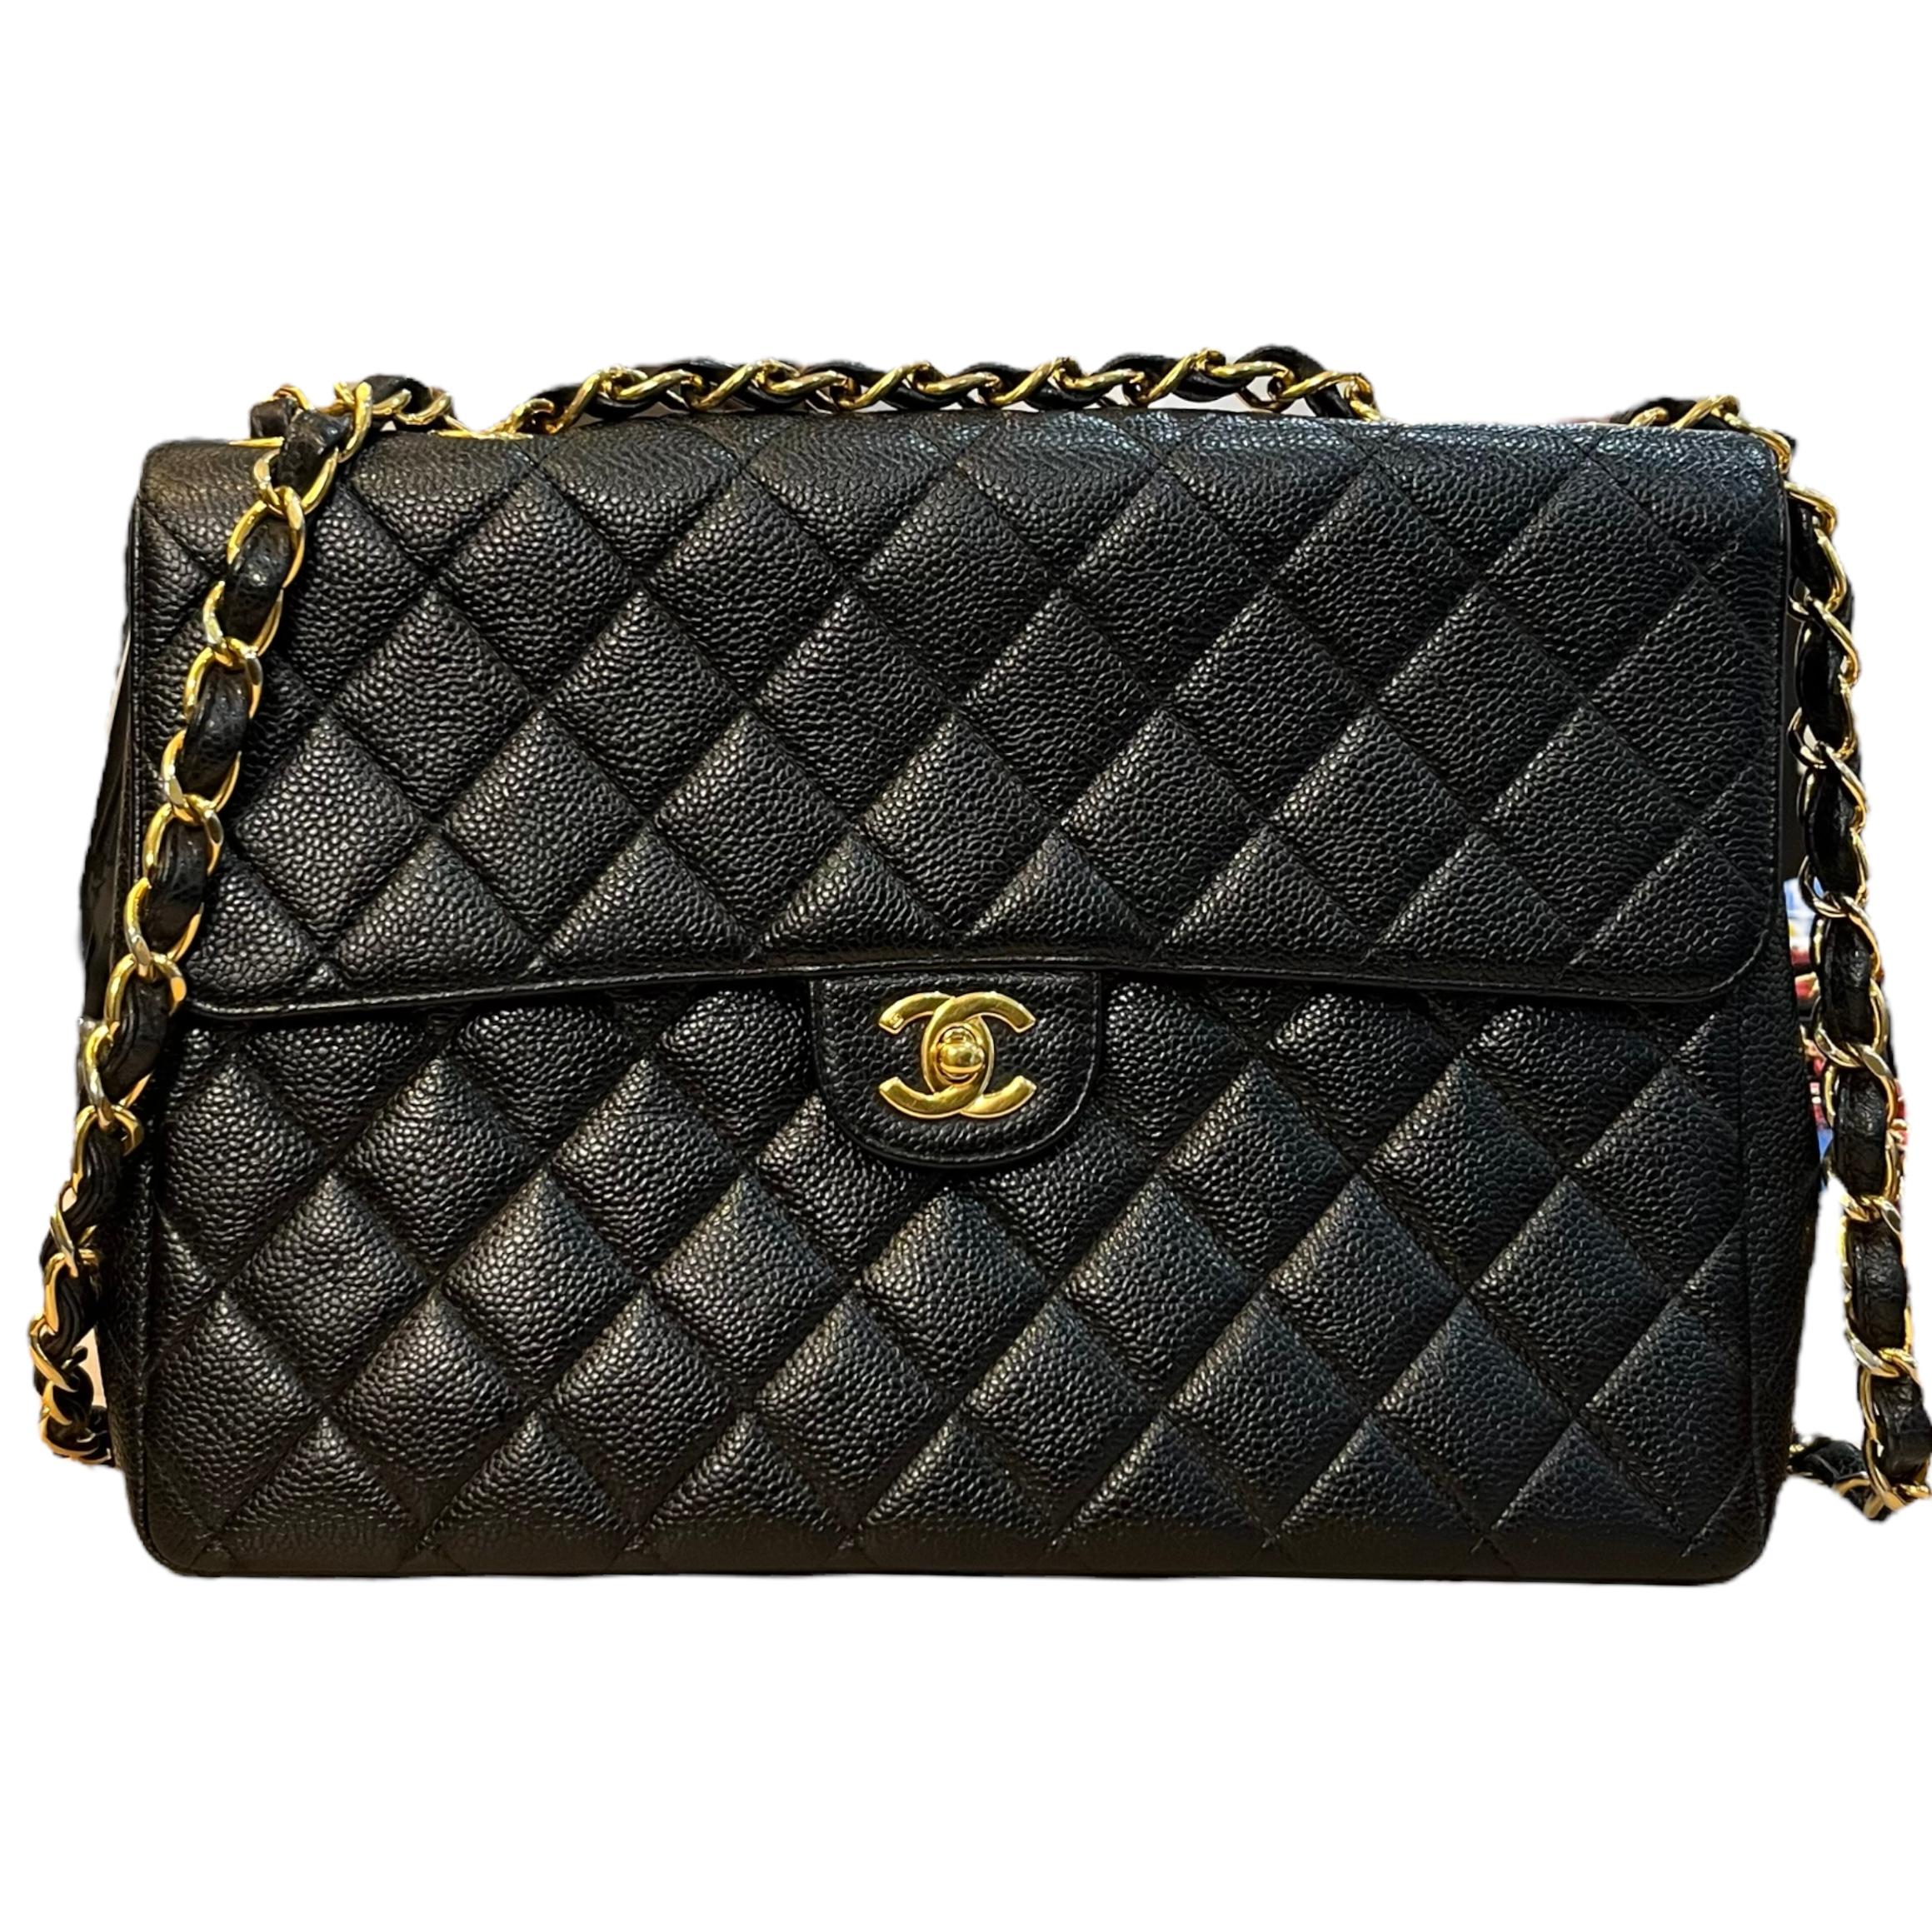 ABSOLUTELY AMAZING CHANEL BAG in Near MINT Condition

CHANEL Caviar Leather Classic Single Flap Jumbo Bag

Made in FRANCE

FEATURES

Black Caviar Quilted Exterior
24k Gold CC Turn Lock Logo
1 Back Mona Lisa Pocket
Black Leather Interior
1 Slip